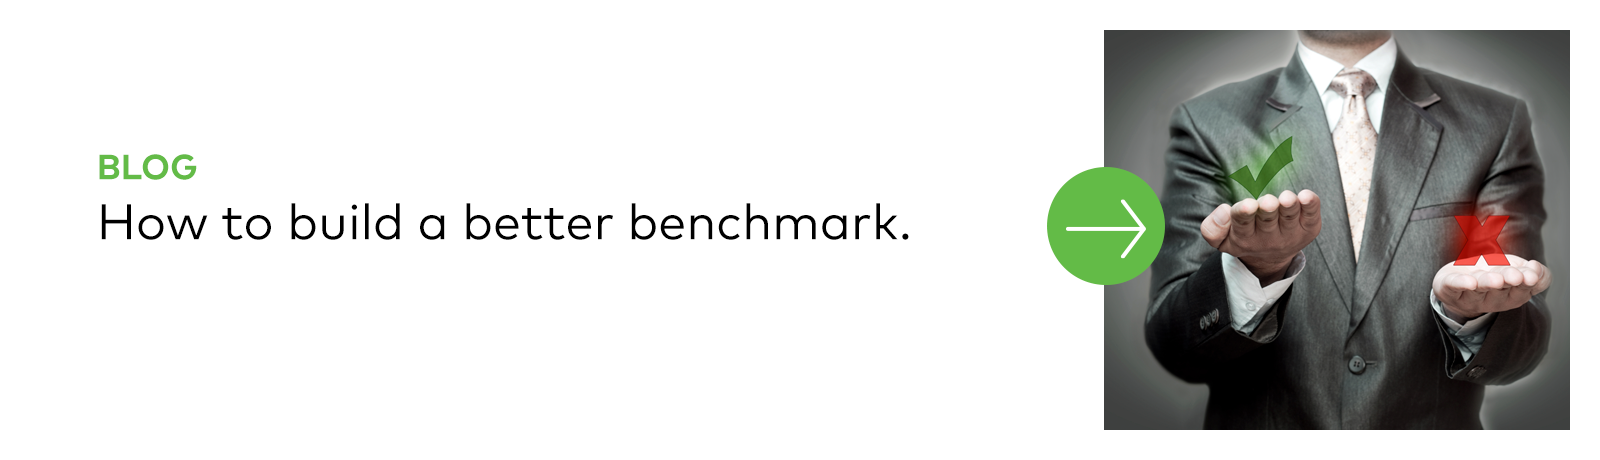 Blog | How to build a better benchmark